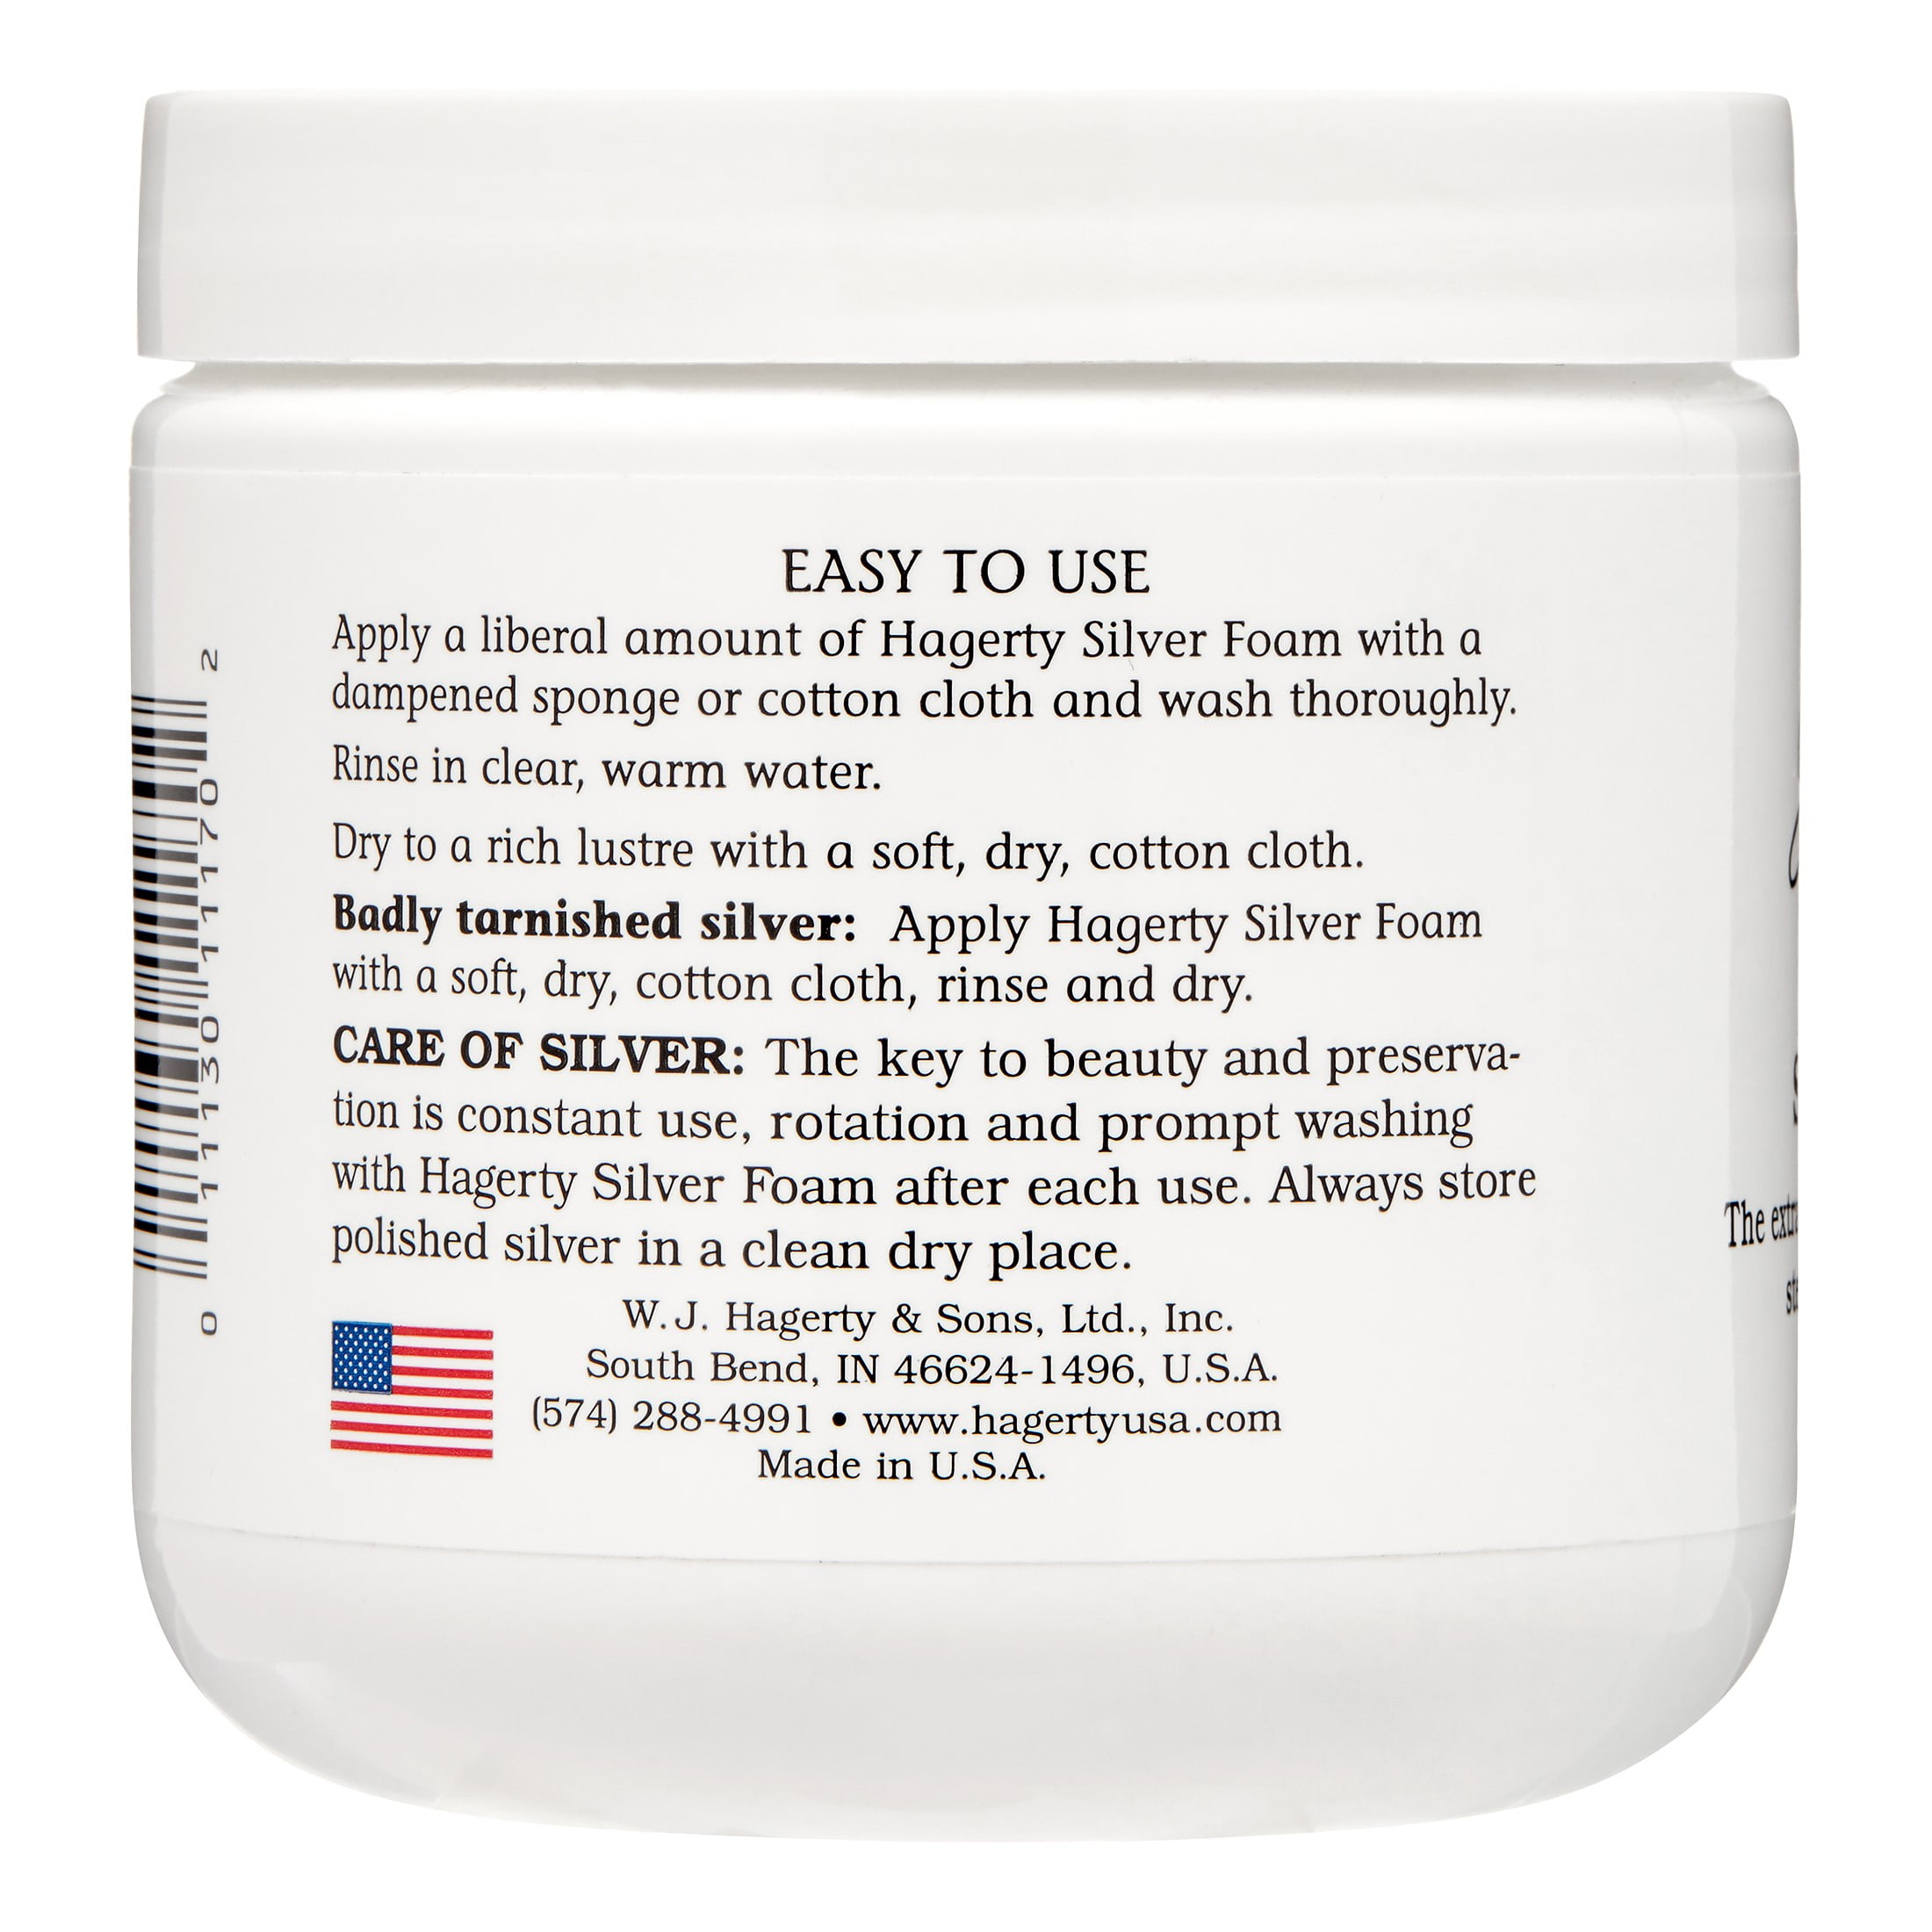 Hagerty Instant Silver Dip 12 Ounce, 3 Pack